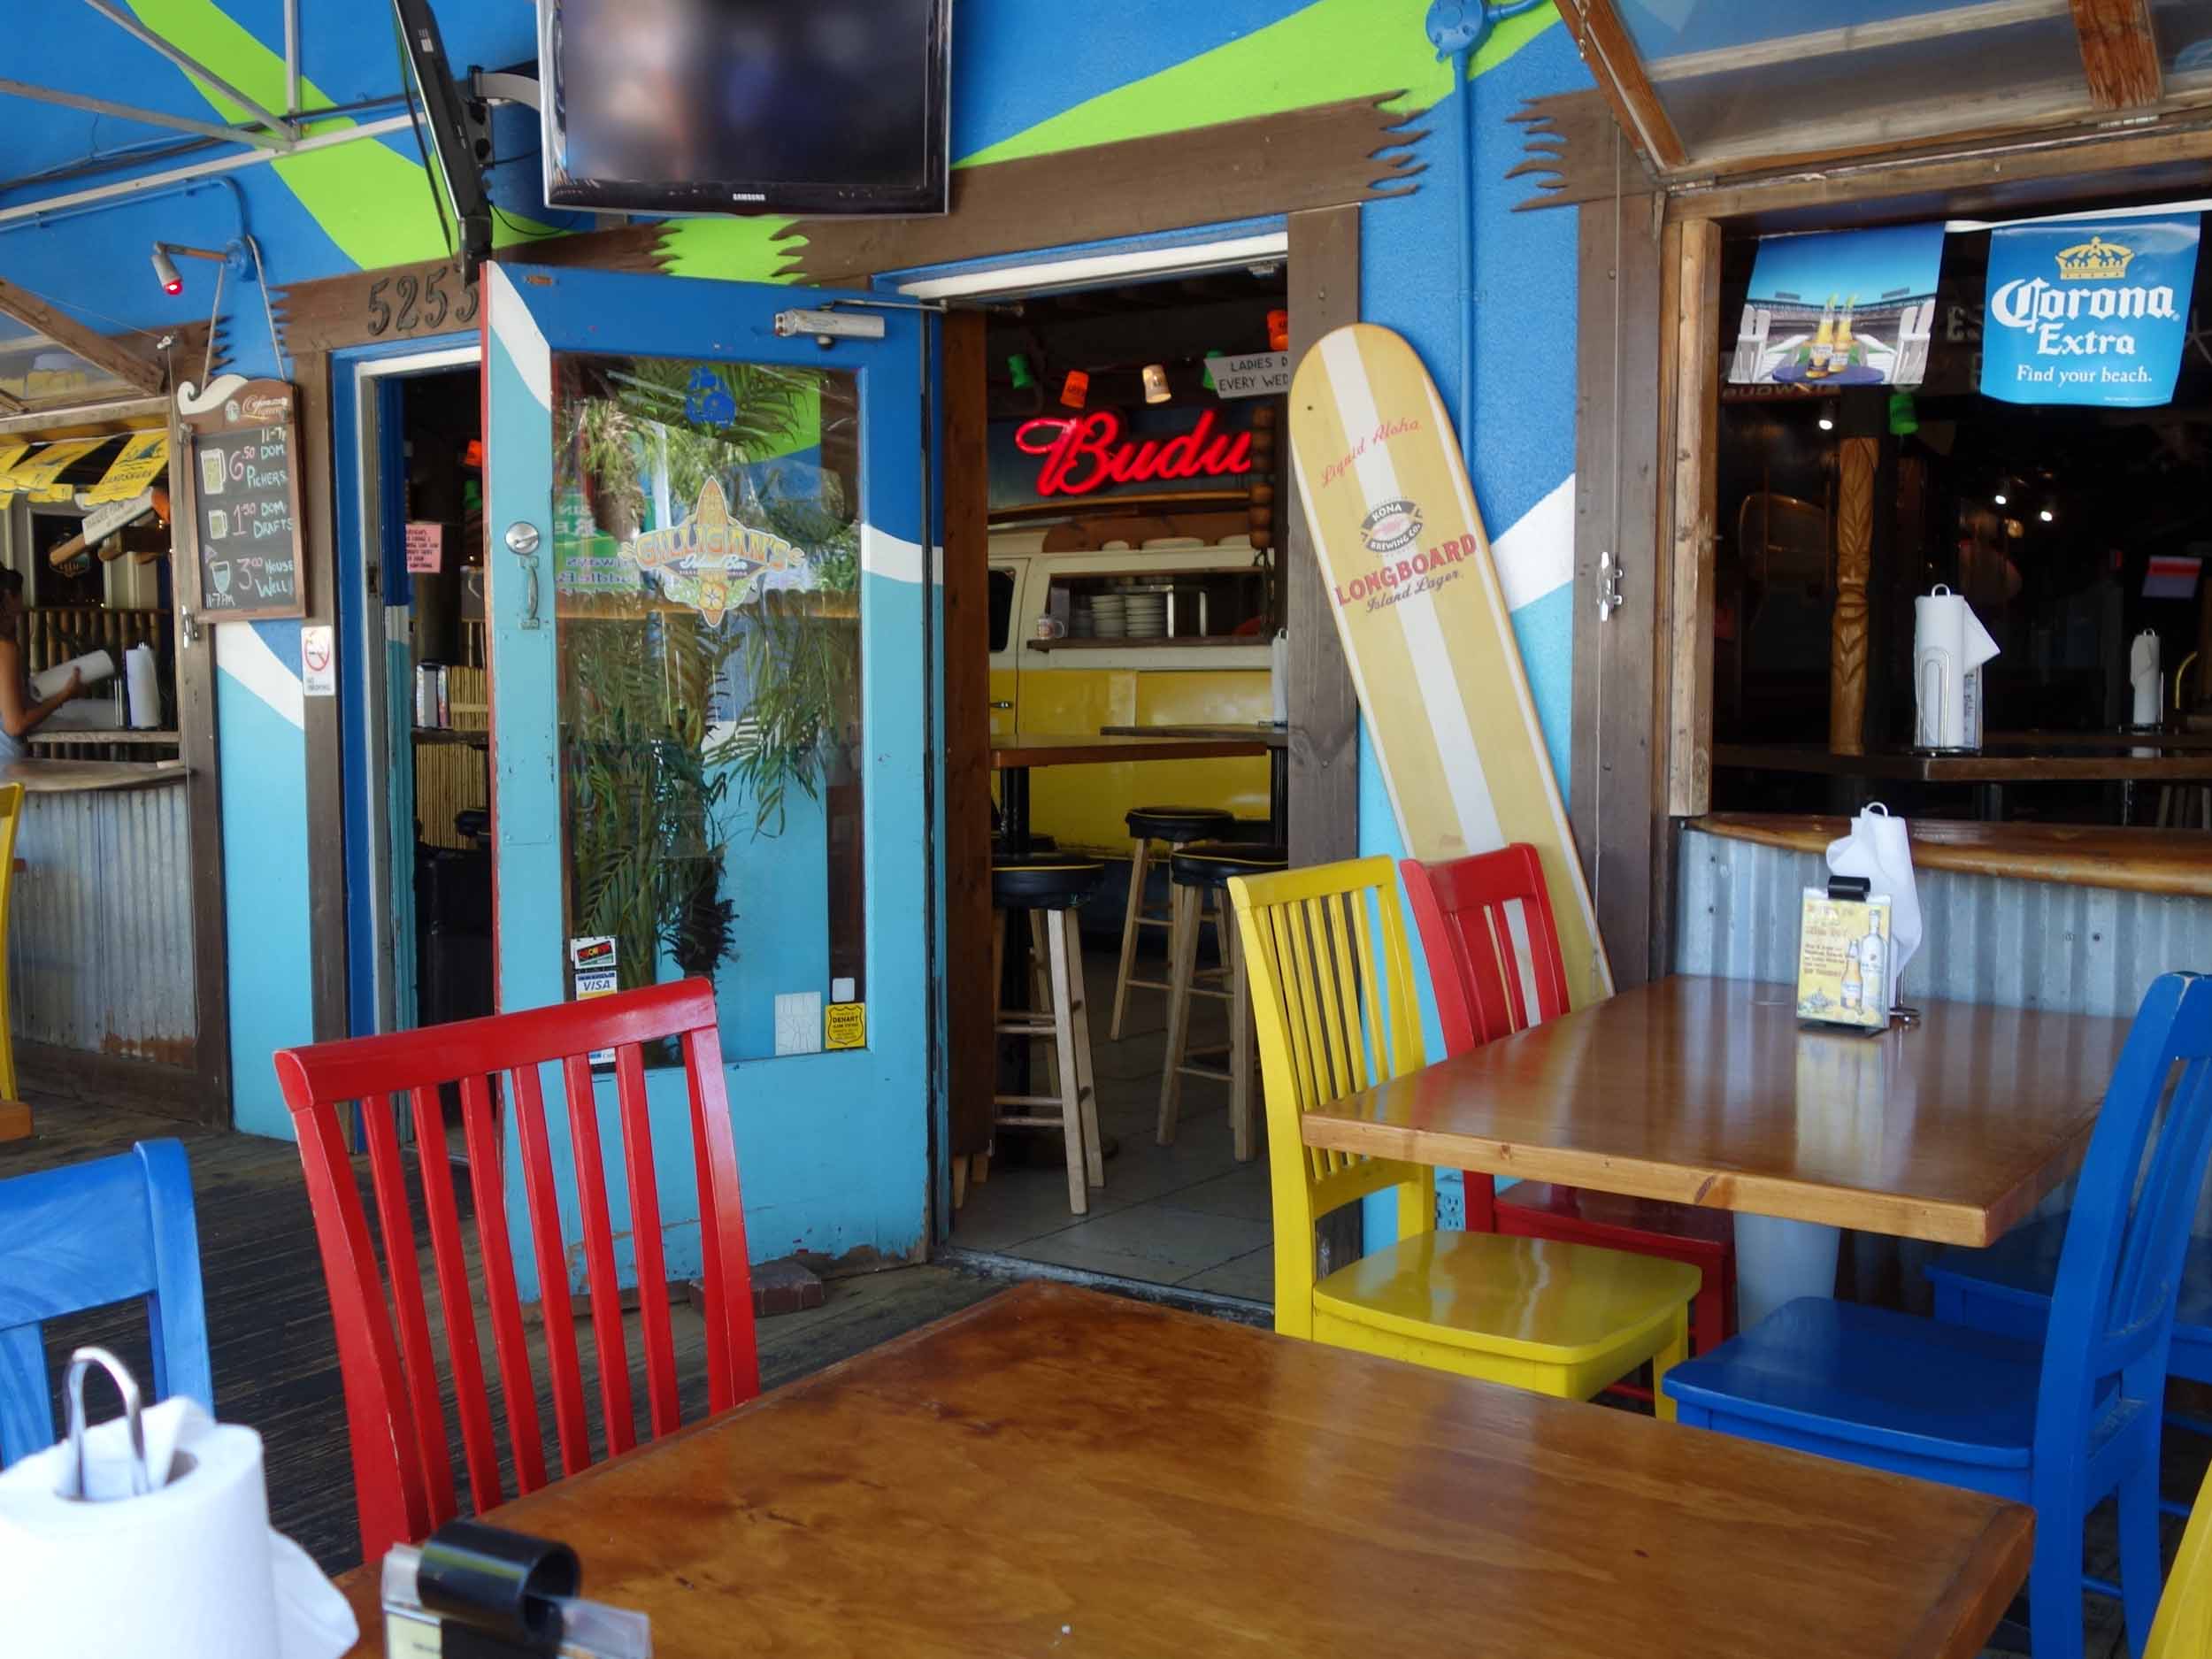 Gilligan's Island Bar and Grill Seating Area